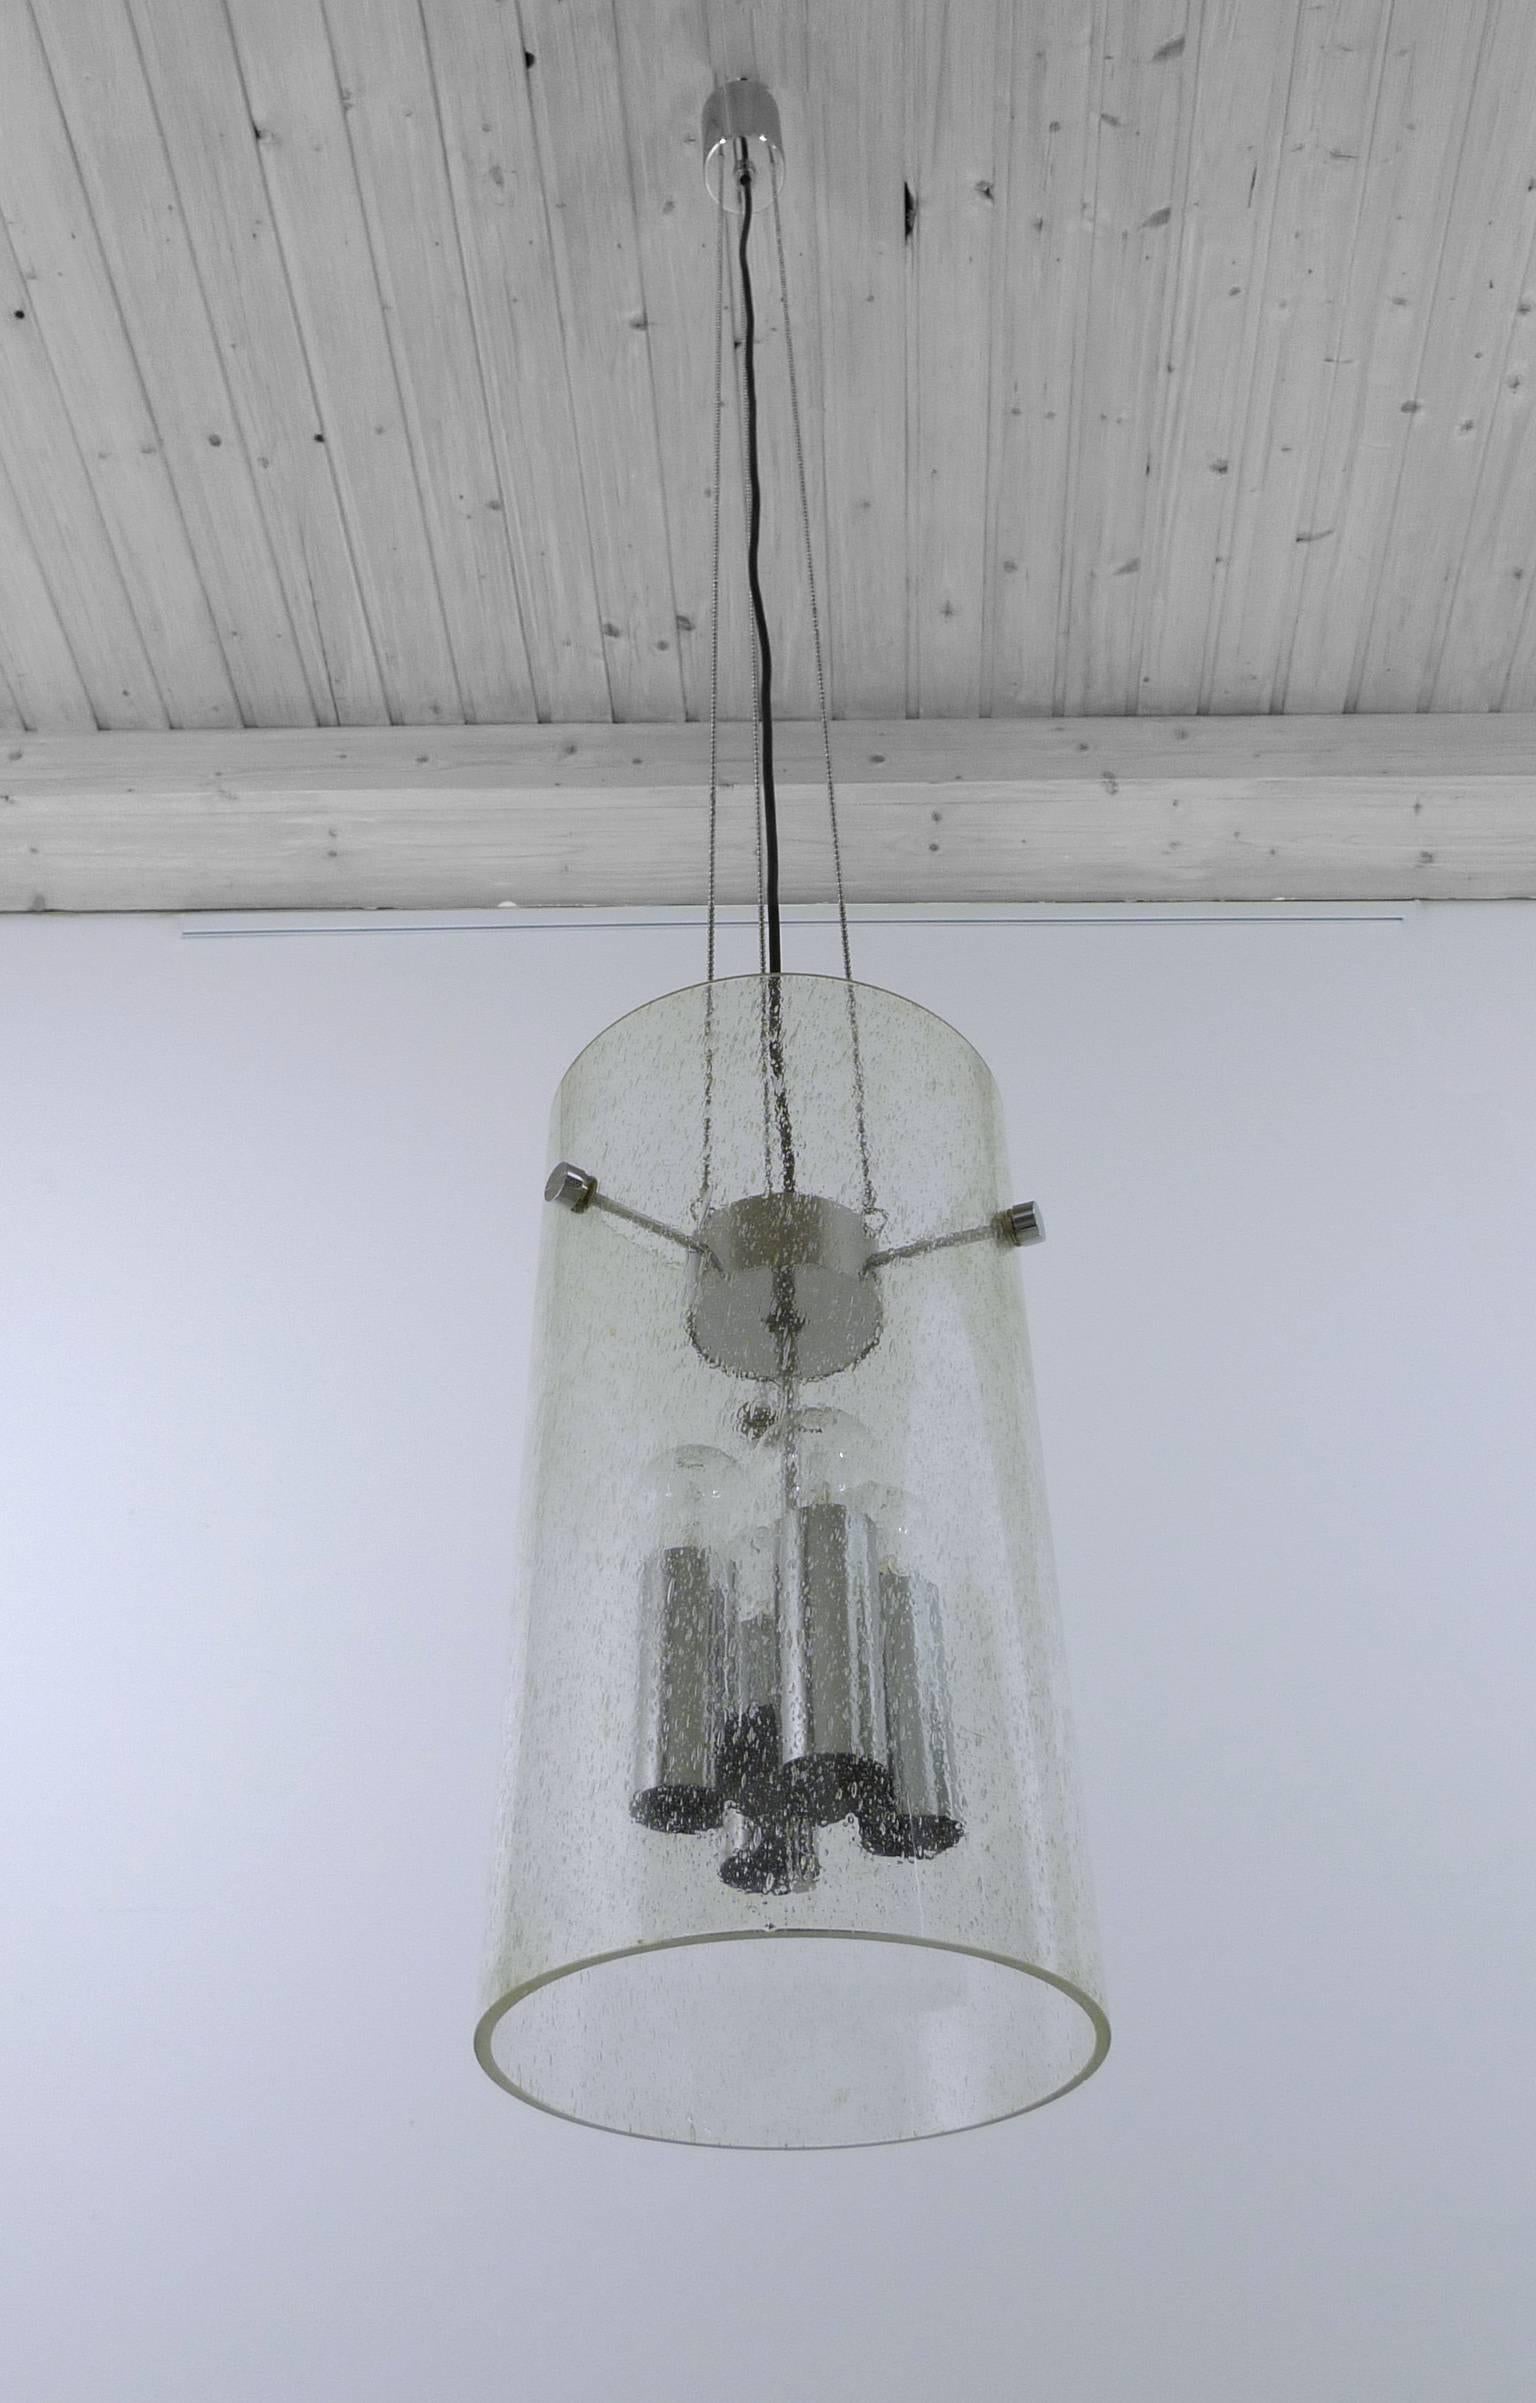 Large cylindrical glass pendant with trapped air bubbles and four E 27 sockets inside. It is suspended from the ceiling by three delicate chains. The glass cylinder has a height of 45 cm. The lamp was produced in the 1970s by Glashütte Limburg in